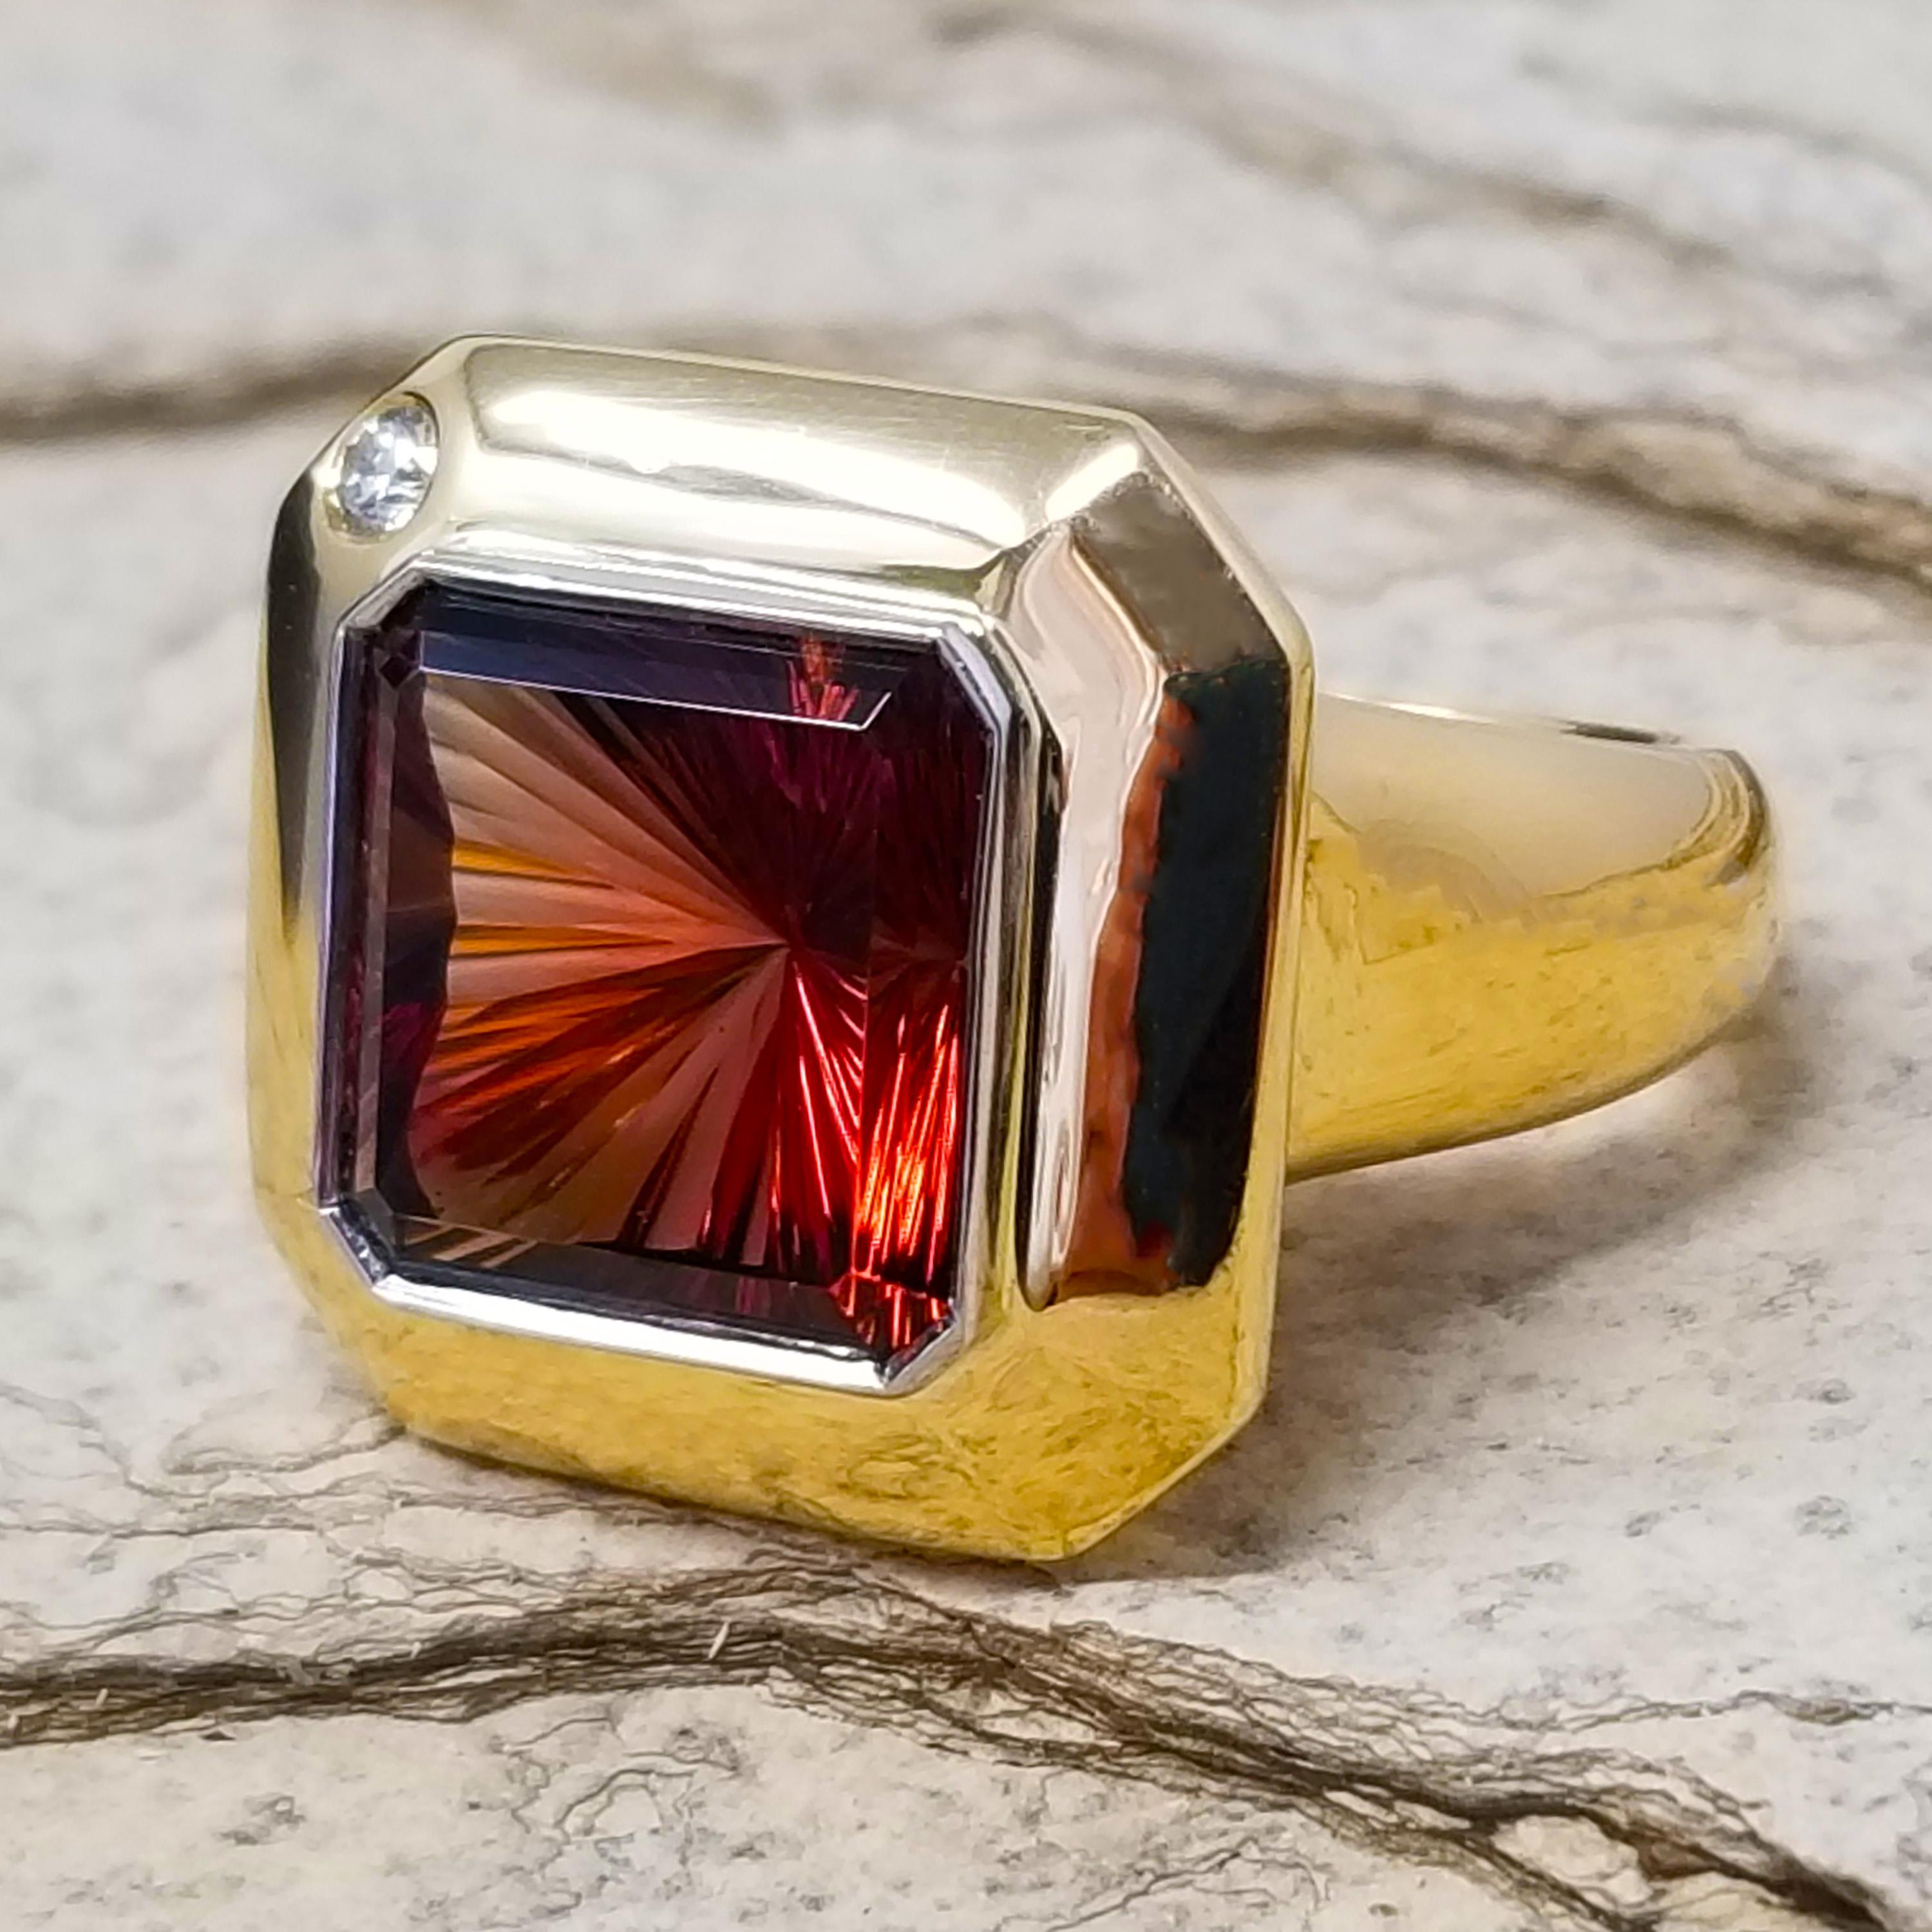 This singular Oregon Sunstone was cut by master craftsman Derek Katzenbach, who is known for his elegant and modern approach to gemstone design. The deep, coppery color and exquisite cut combine to gorgeous effect.

The bold 